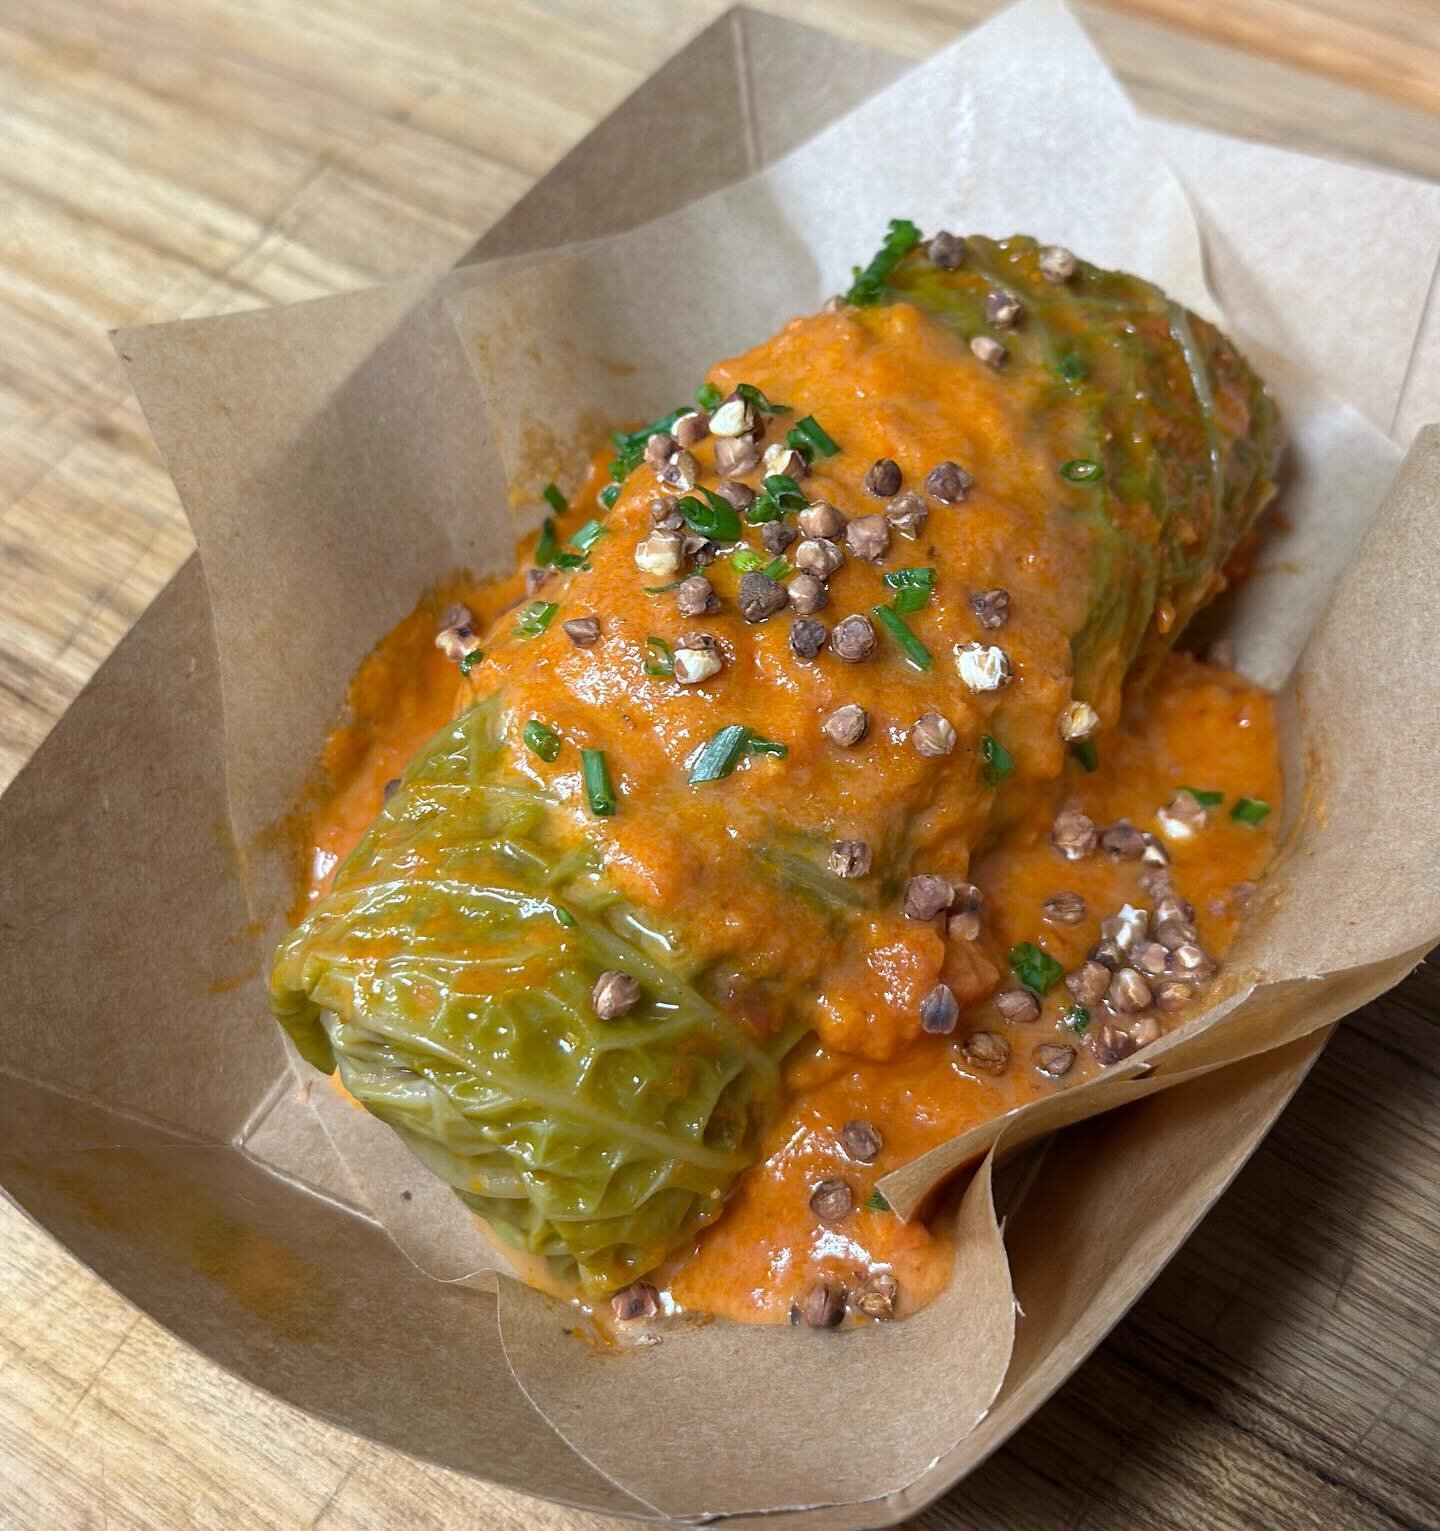 Small batch winter special before Spring now that our duck pierogi are sold out:
- Gołąbki: stuffed cabbage rolls made w/ local acorn-fed @waldenhillco pork, grass-fed beef, buckwheat, caramelized onion, and served w/ a smoked tomato-vodka cream sauc